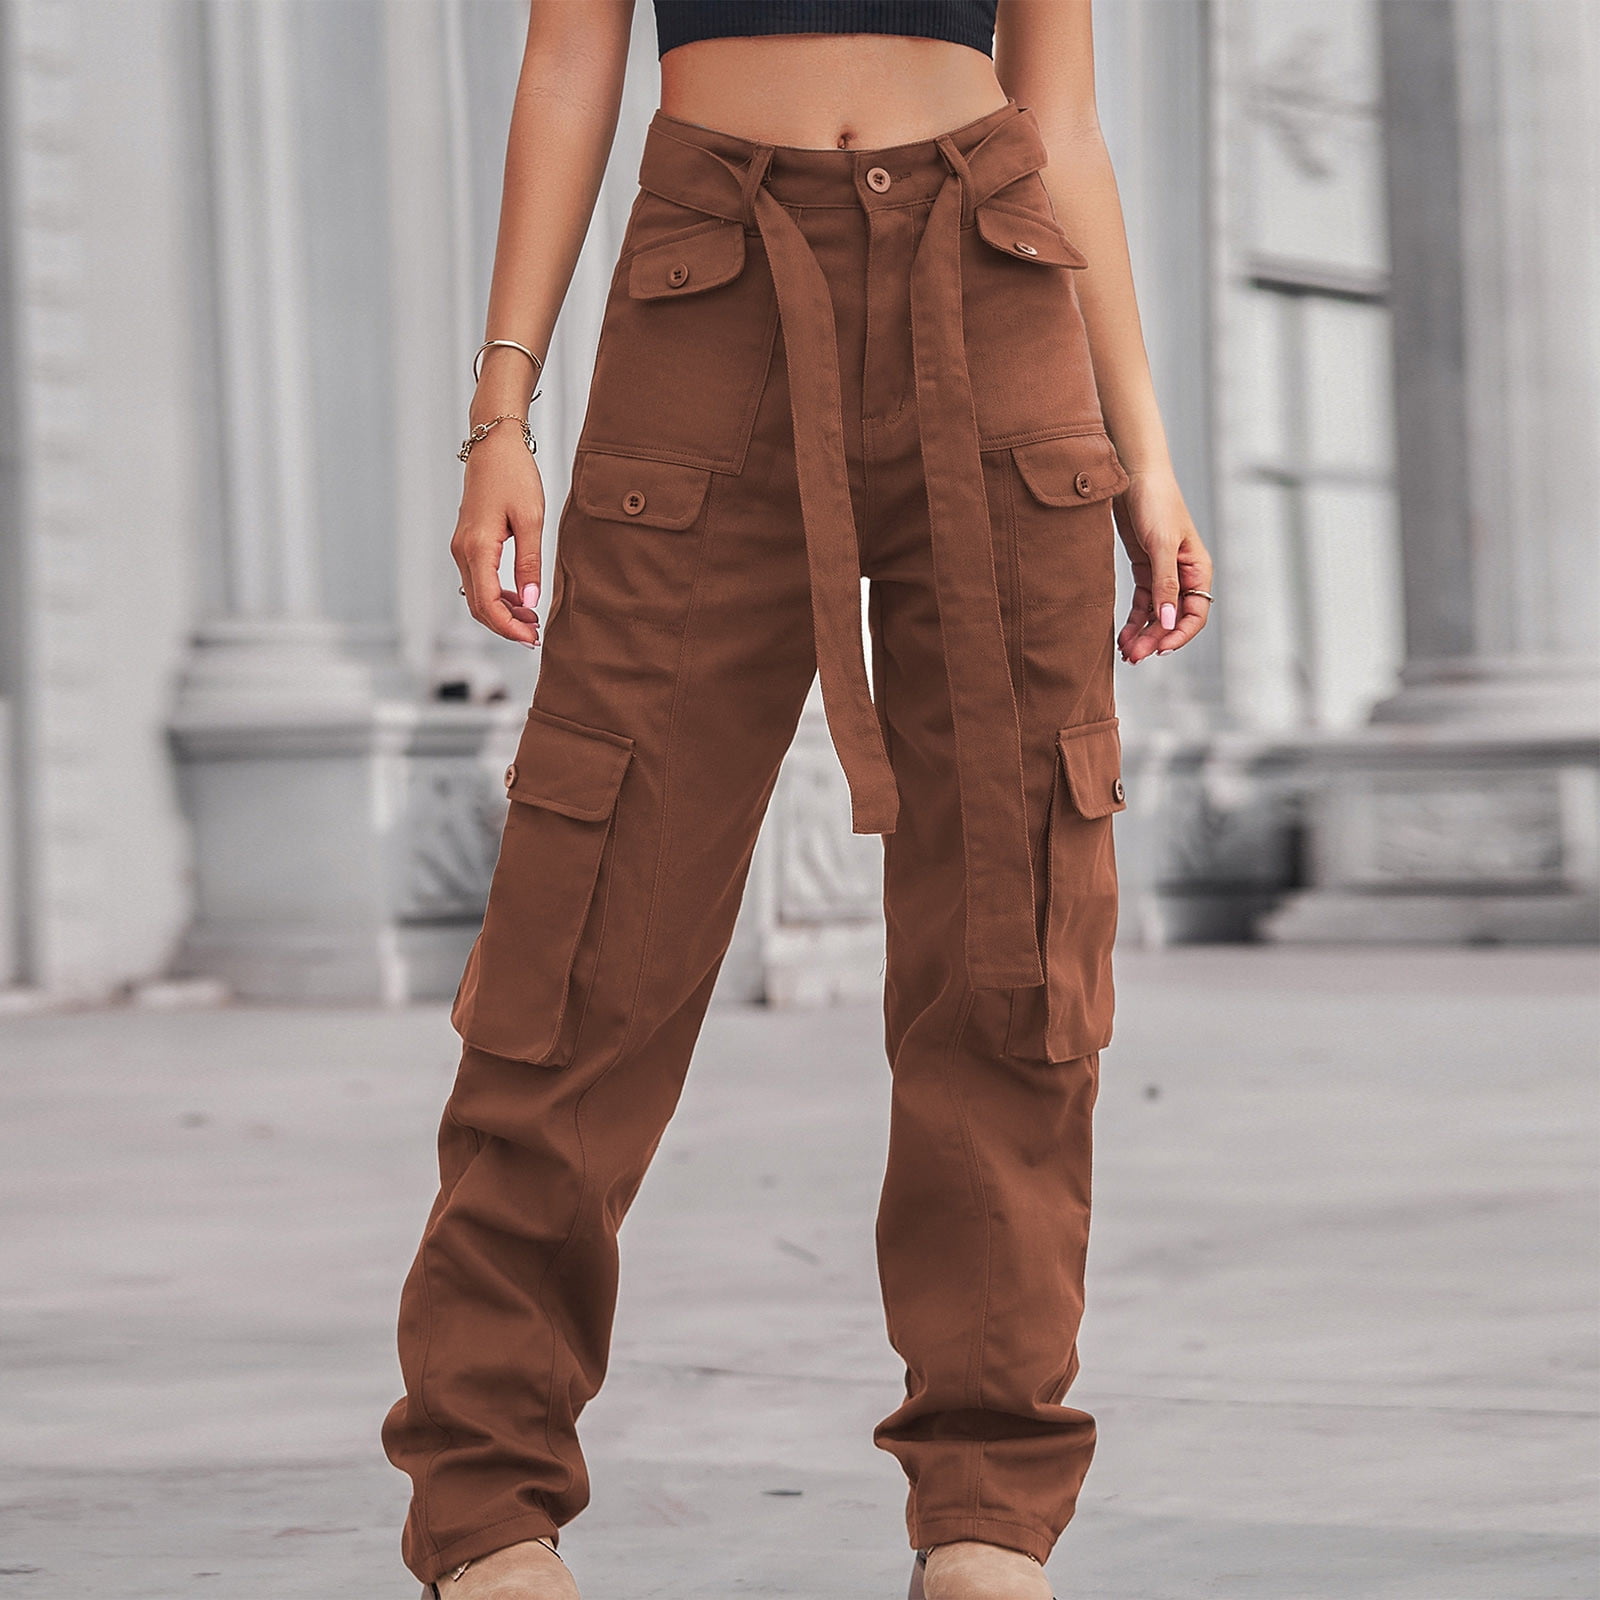 Tdoqot Women's Cargo Pants- with Pockets High weight Casual Fashion  Straight Leg Pants Brown Size M